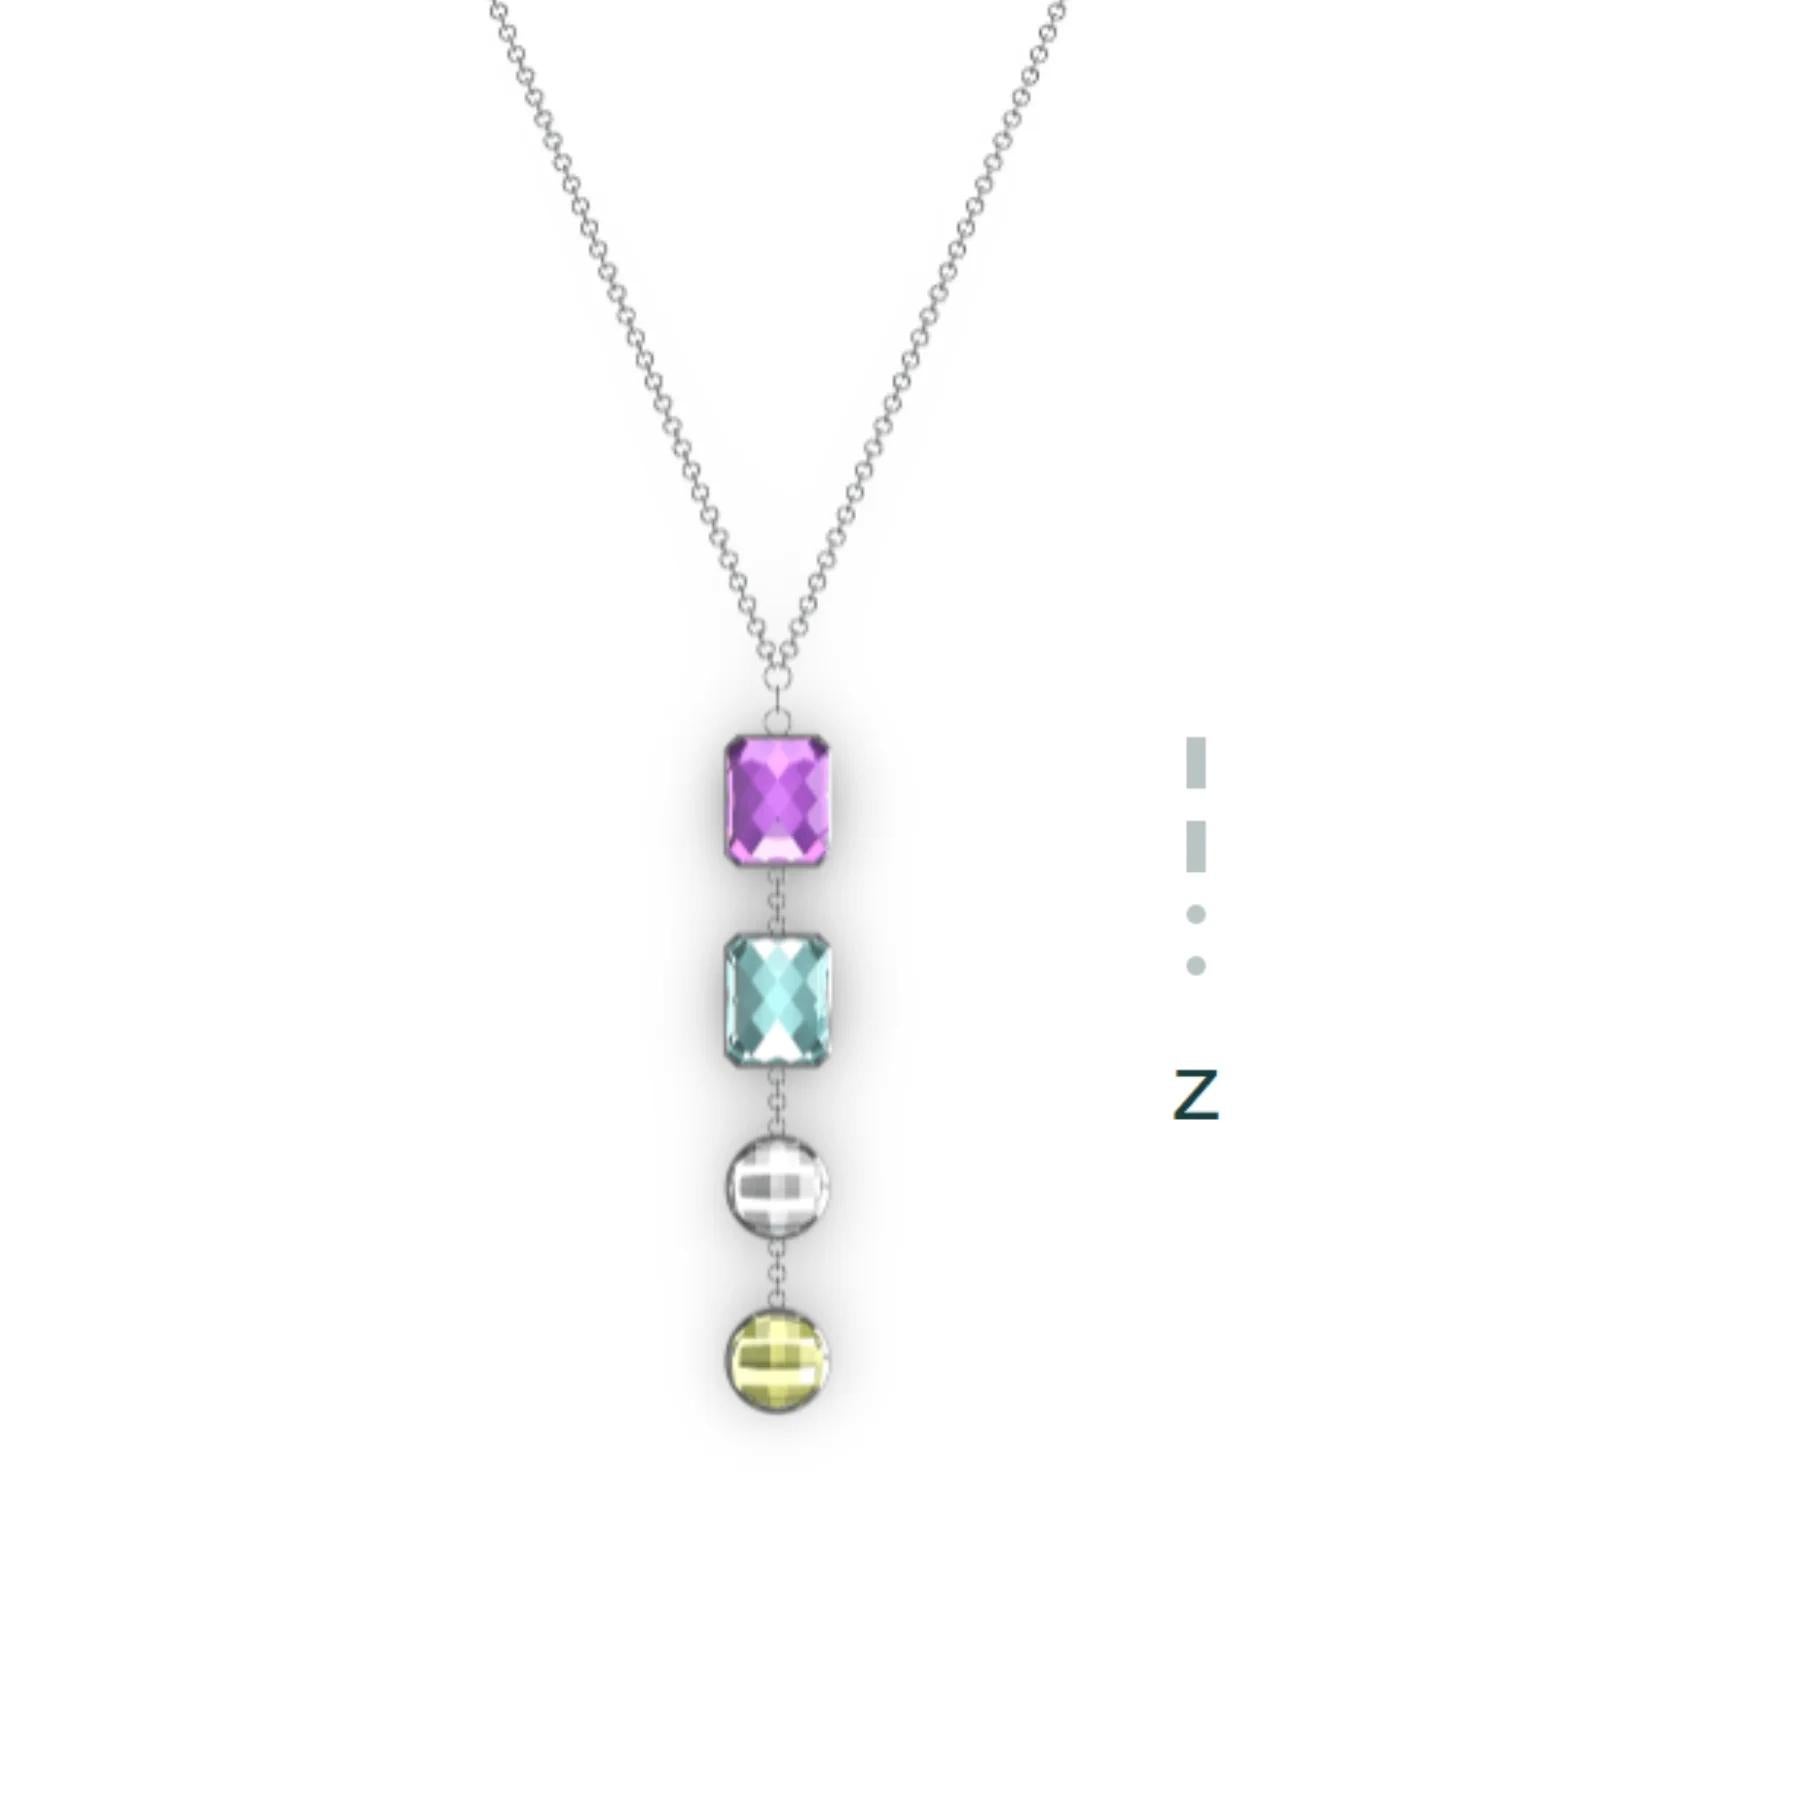 Z is for Zoe, Zen, and Zander … Encode the letters of your name, your children's initials, your lucky numbers, or a secret message of inspiration.

Details of this piece:
Handcrafted
Recycled 925 sterling silver

About Us
In the intricate dance of